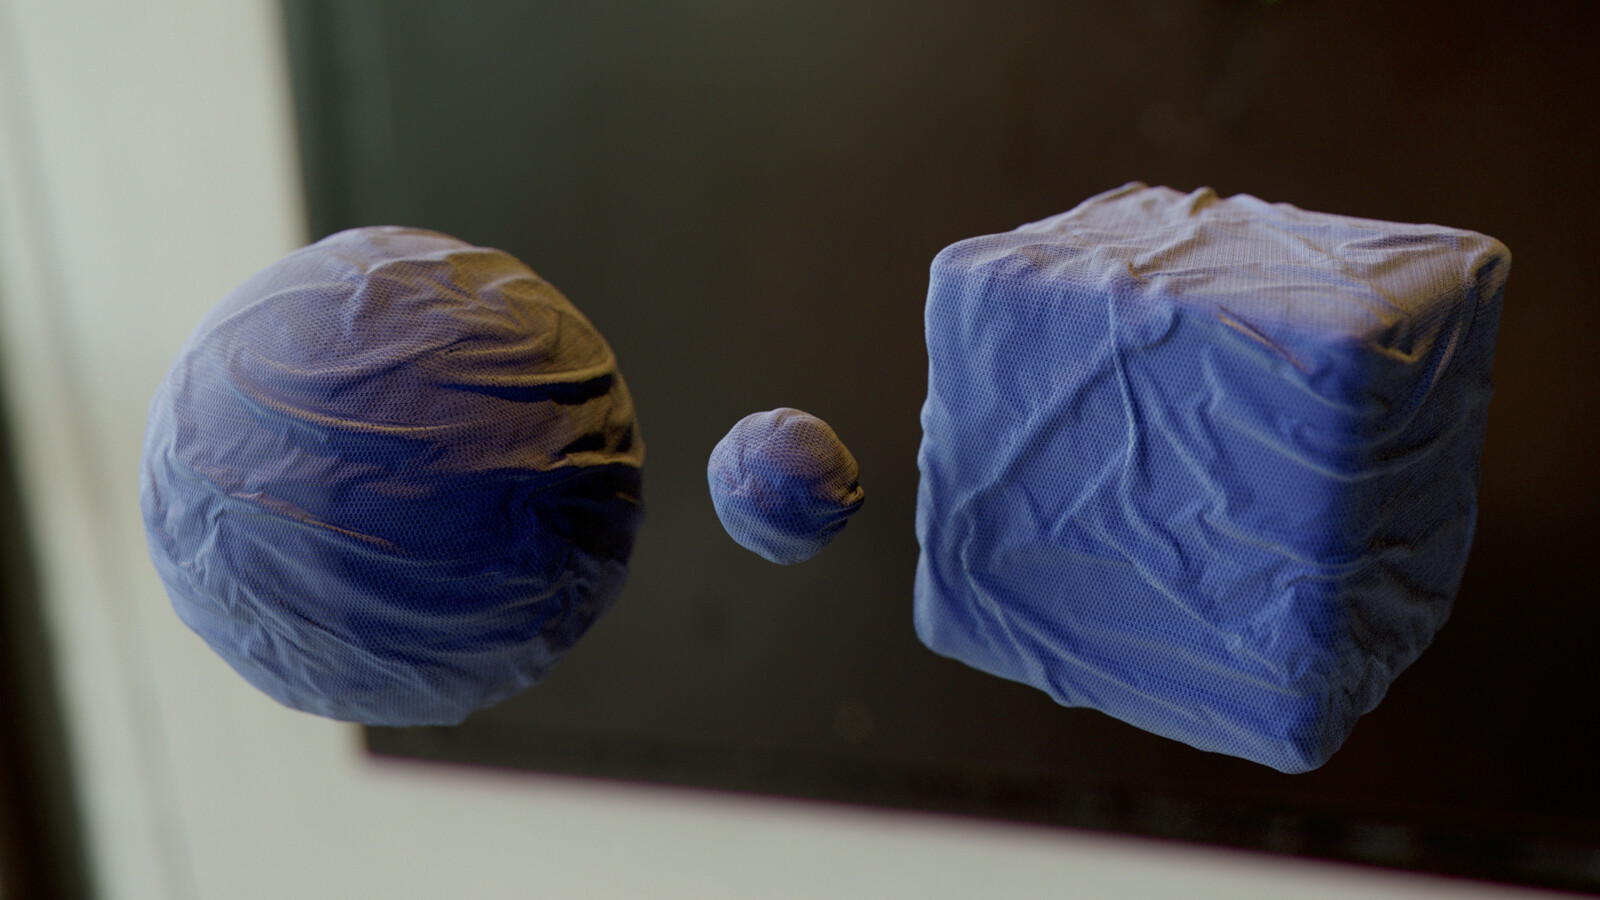 same procedural cloth material on spheres and beveled cube